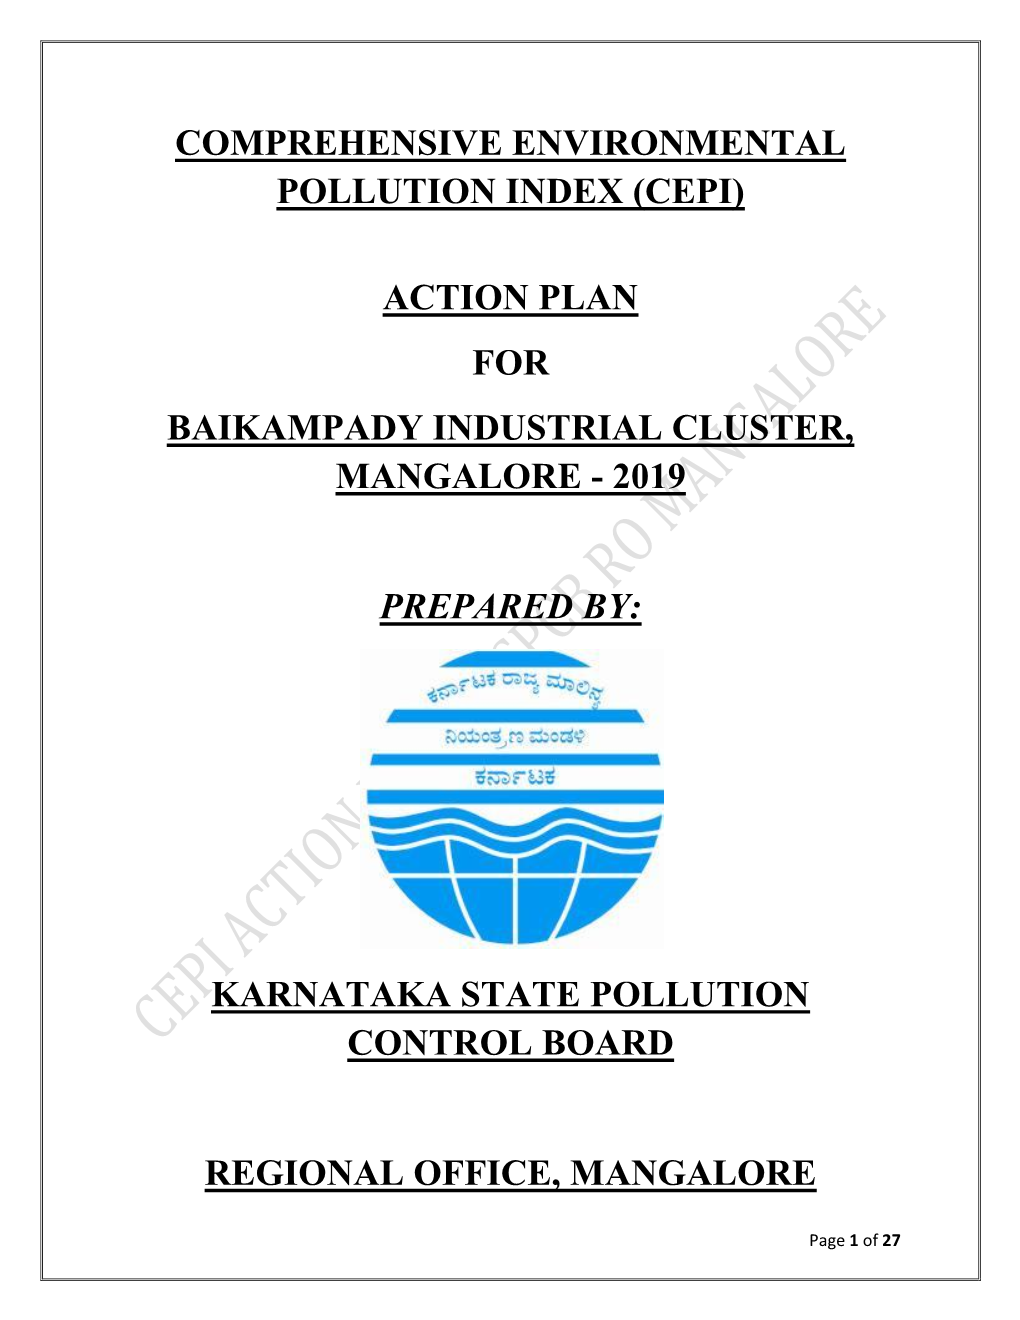 Action Plan for Baikampady Industrial Cluster, Mangalore - 2019